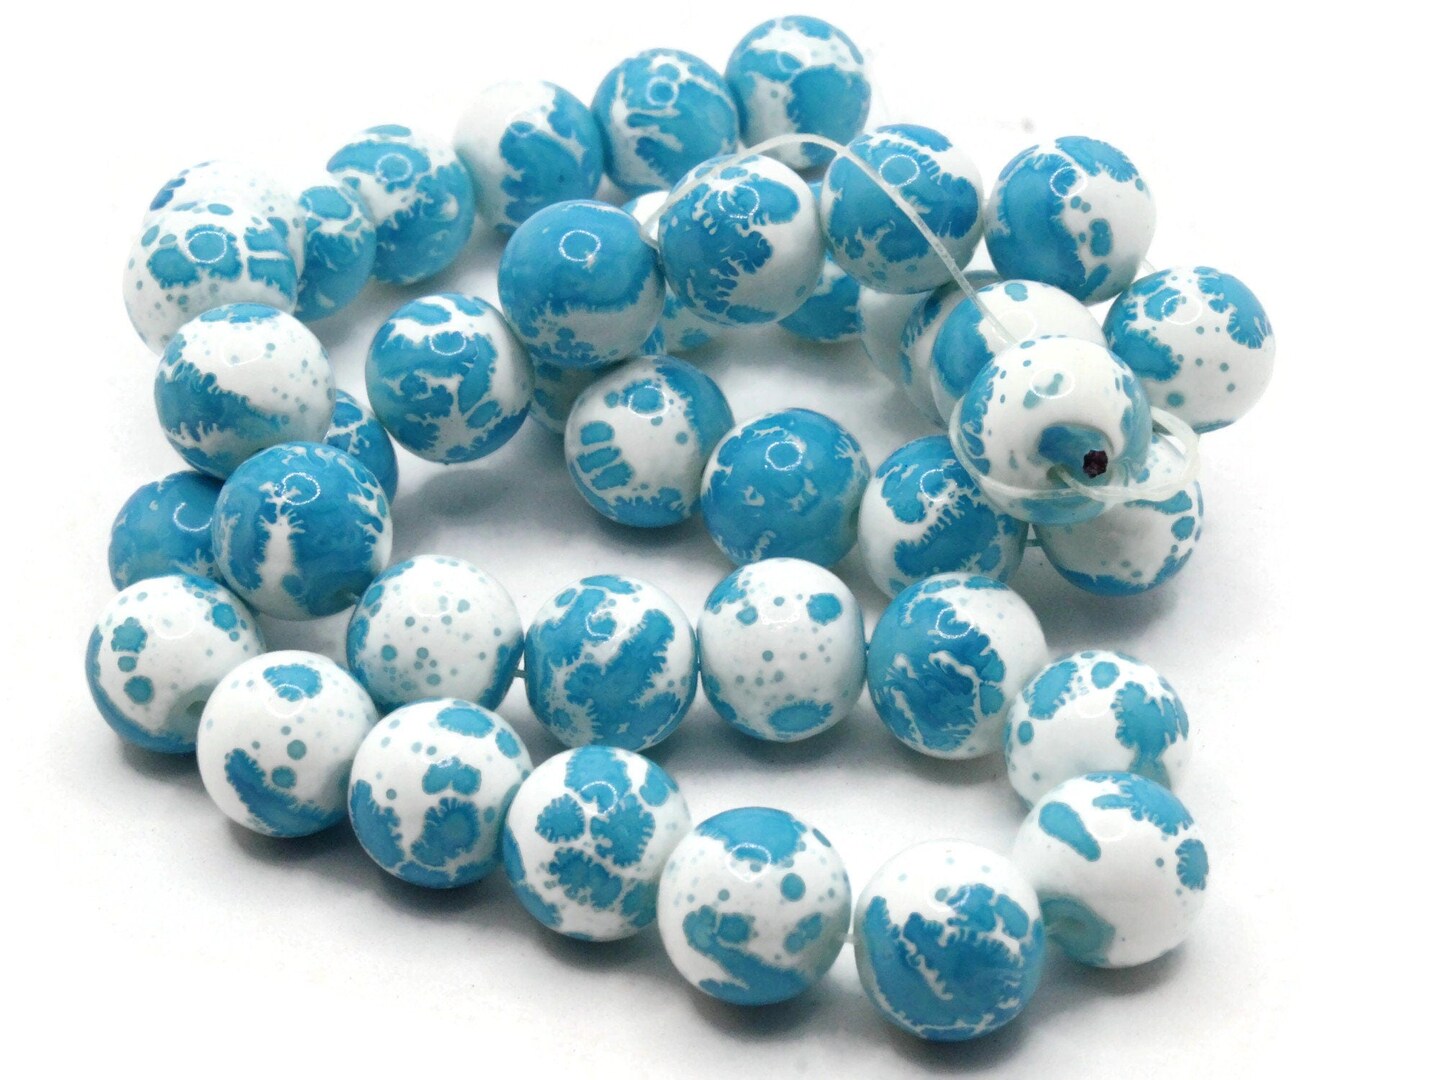 40 10mm White with Sky Blue Splatter Paint Smooth Round Glass Beads